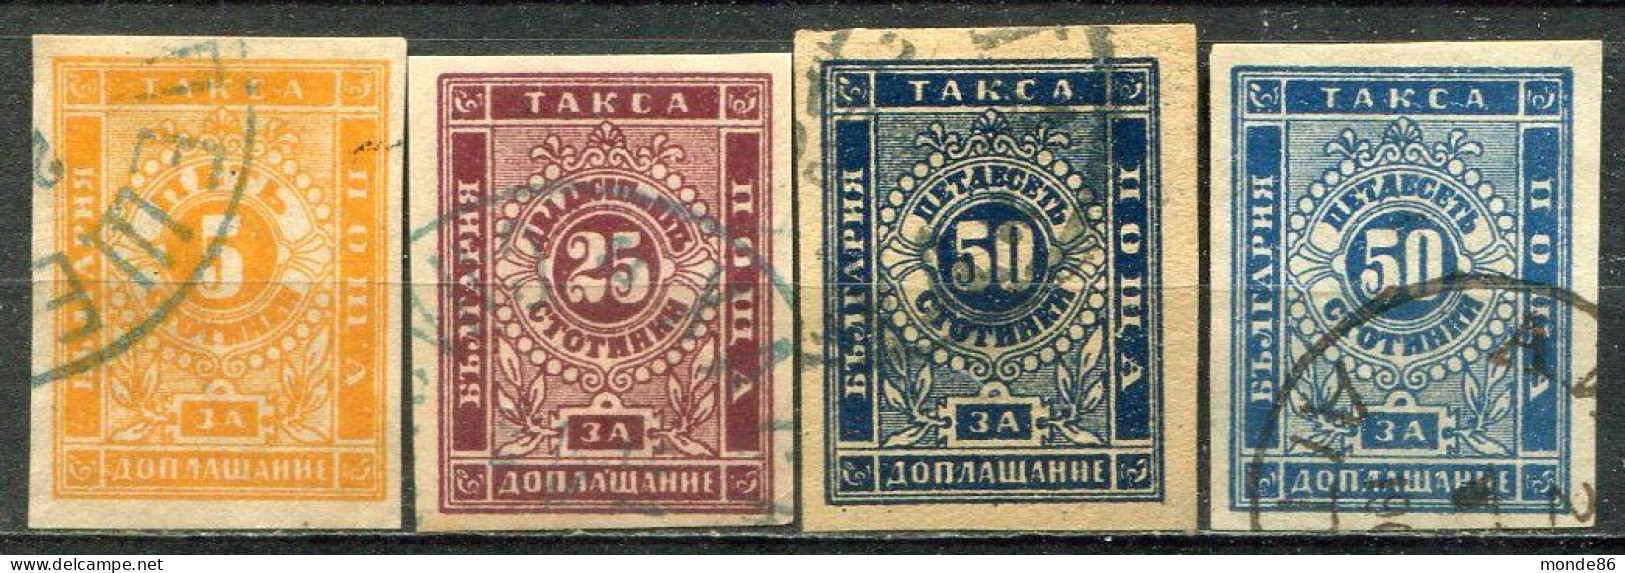 BULGARIE - Y&T Taxe N° 4-6 + 6a (o) - Postage Due